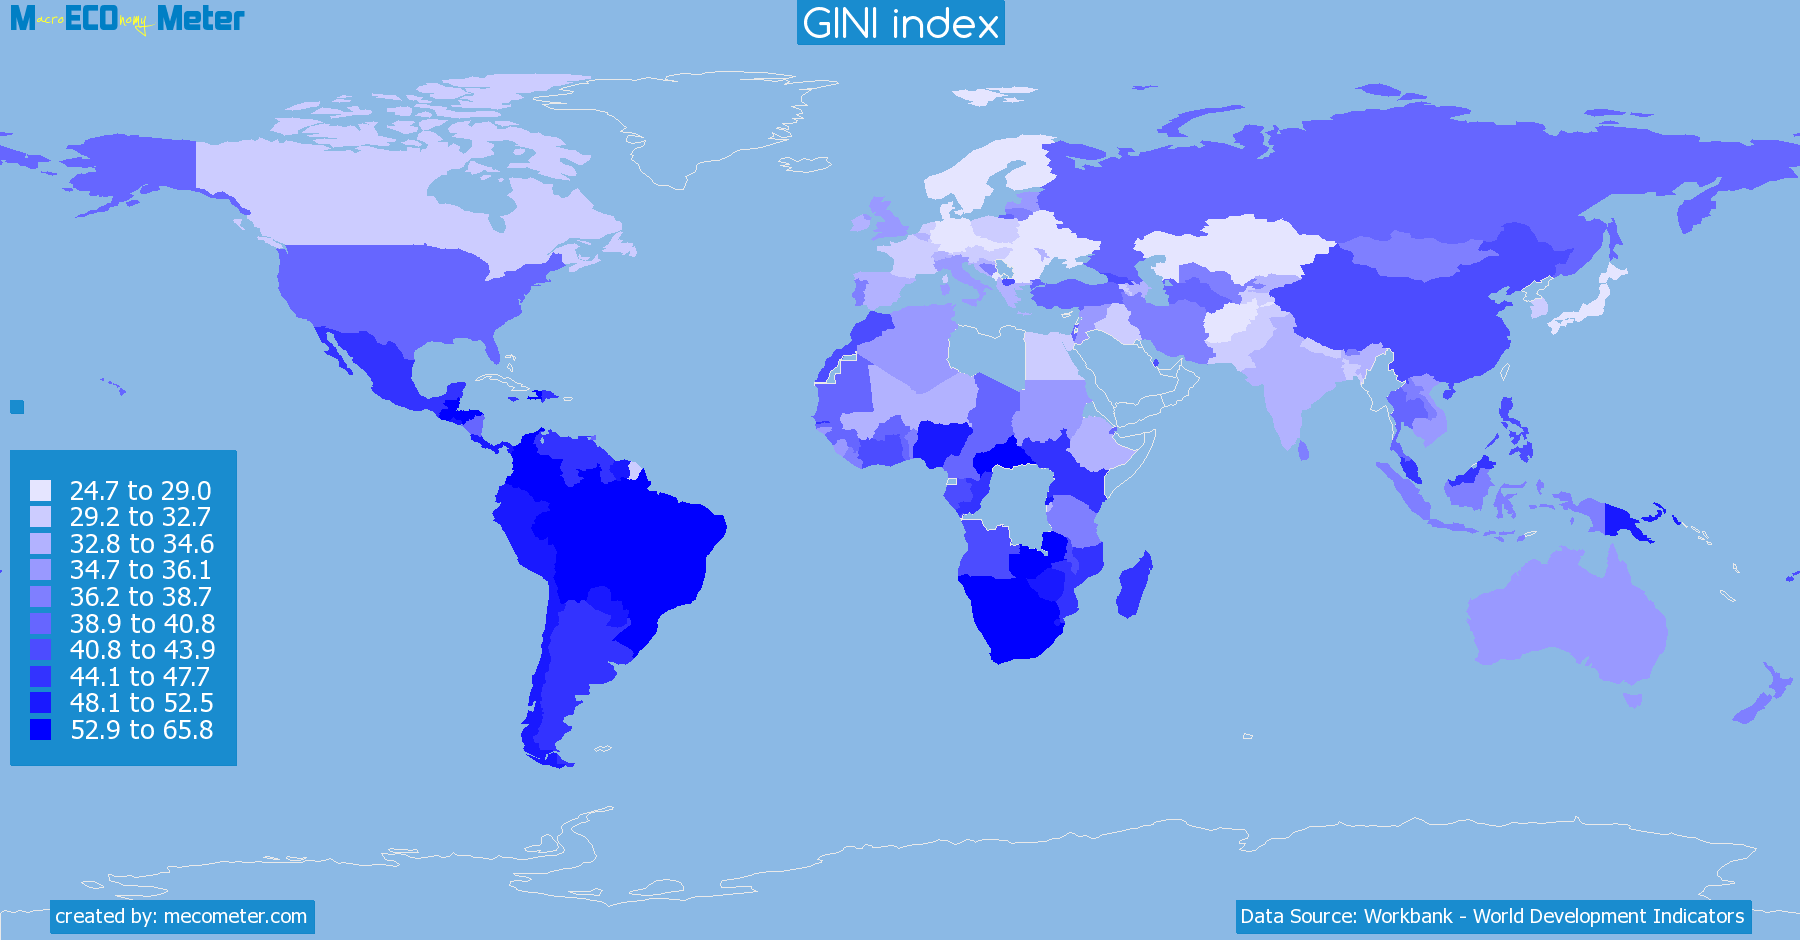 Worldmap of all countries colored to reflect the values of GINI index